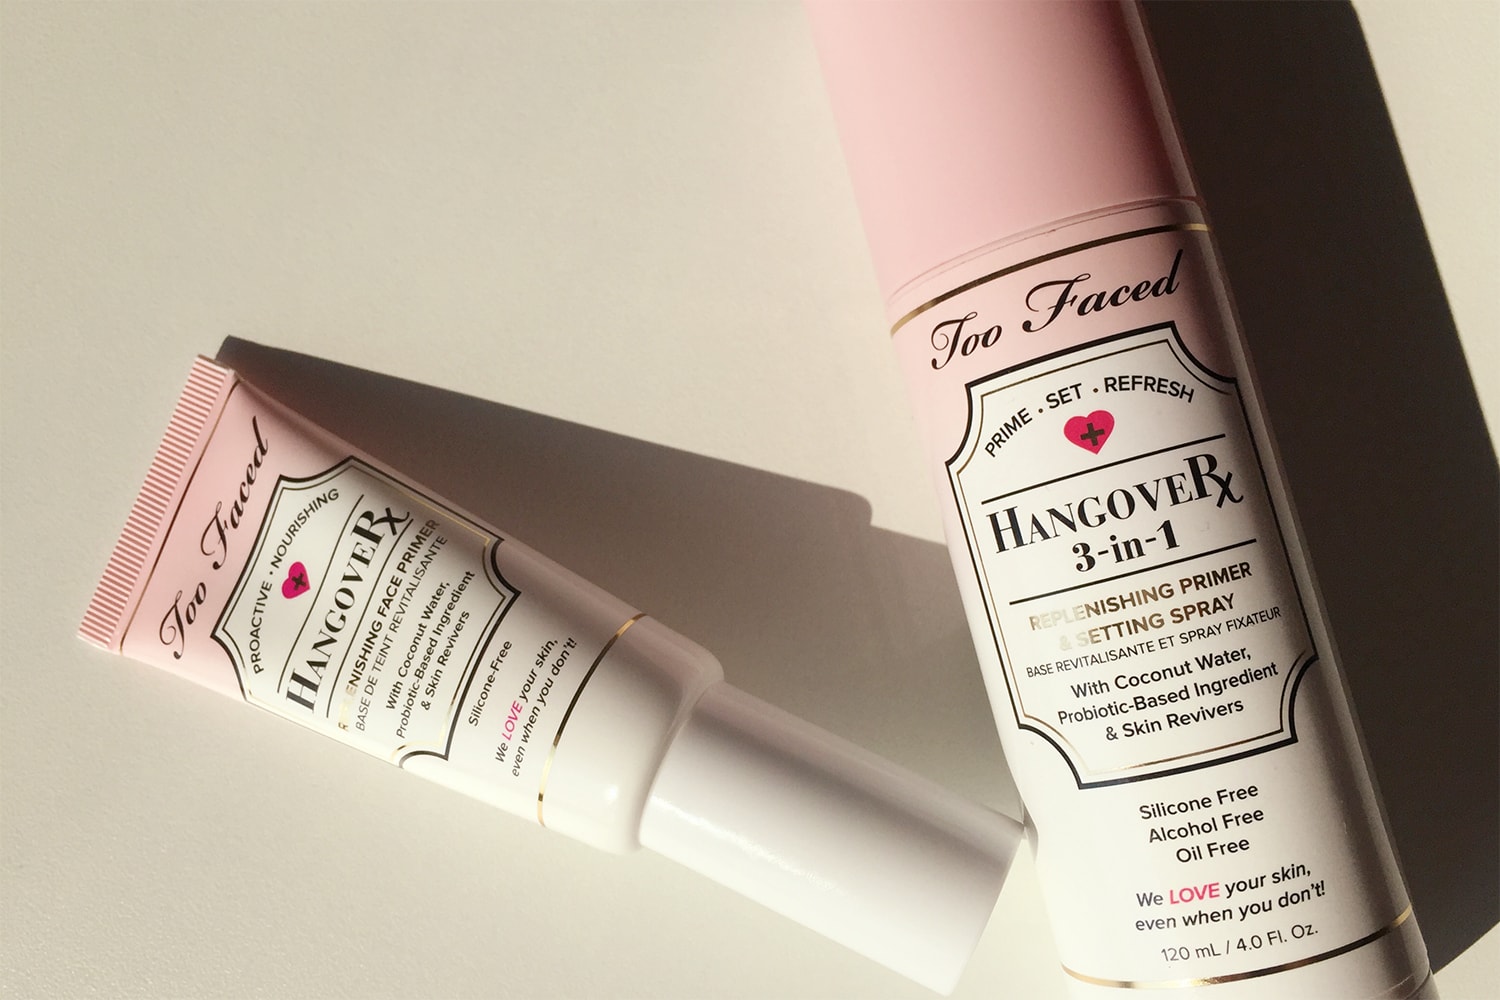 Too Faced Hangover 3-in-1 Replenishing Primer Setting Spray Review Beauty Makeup Cosmetics Face